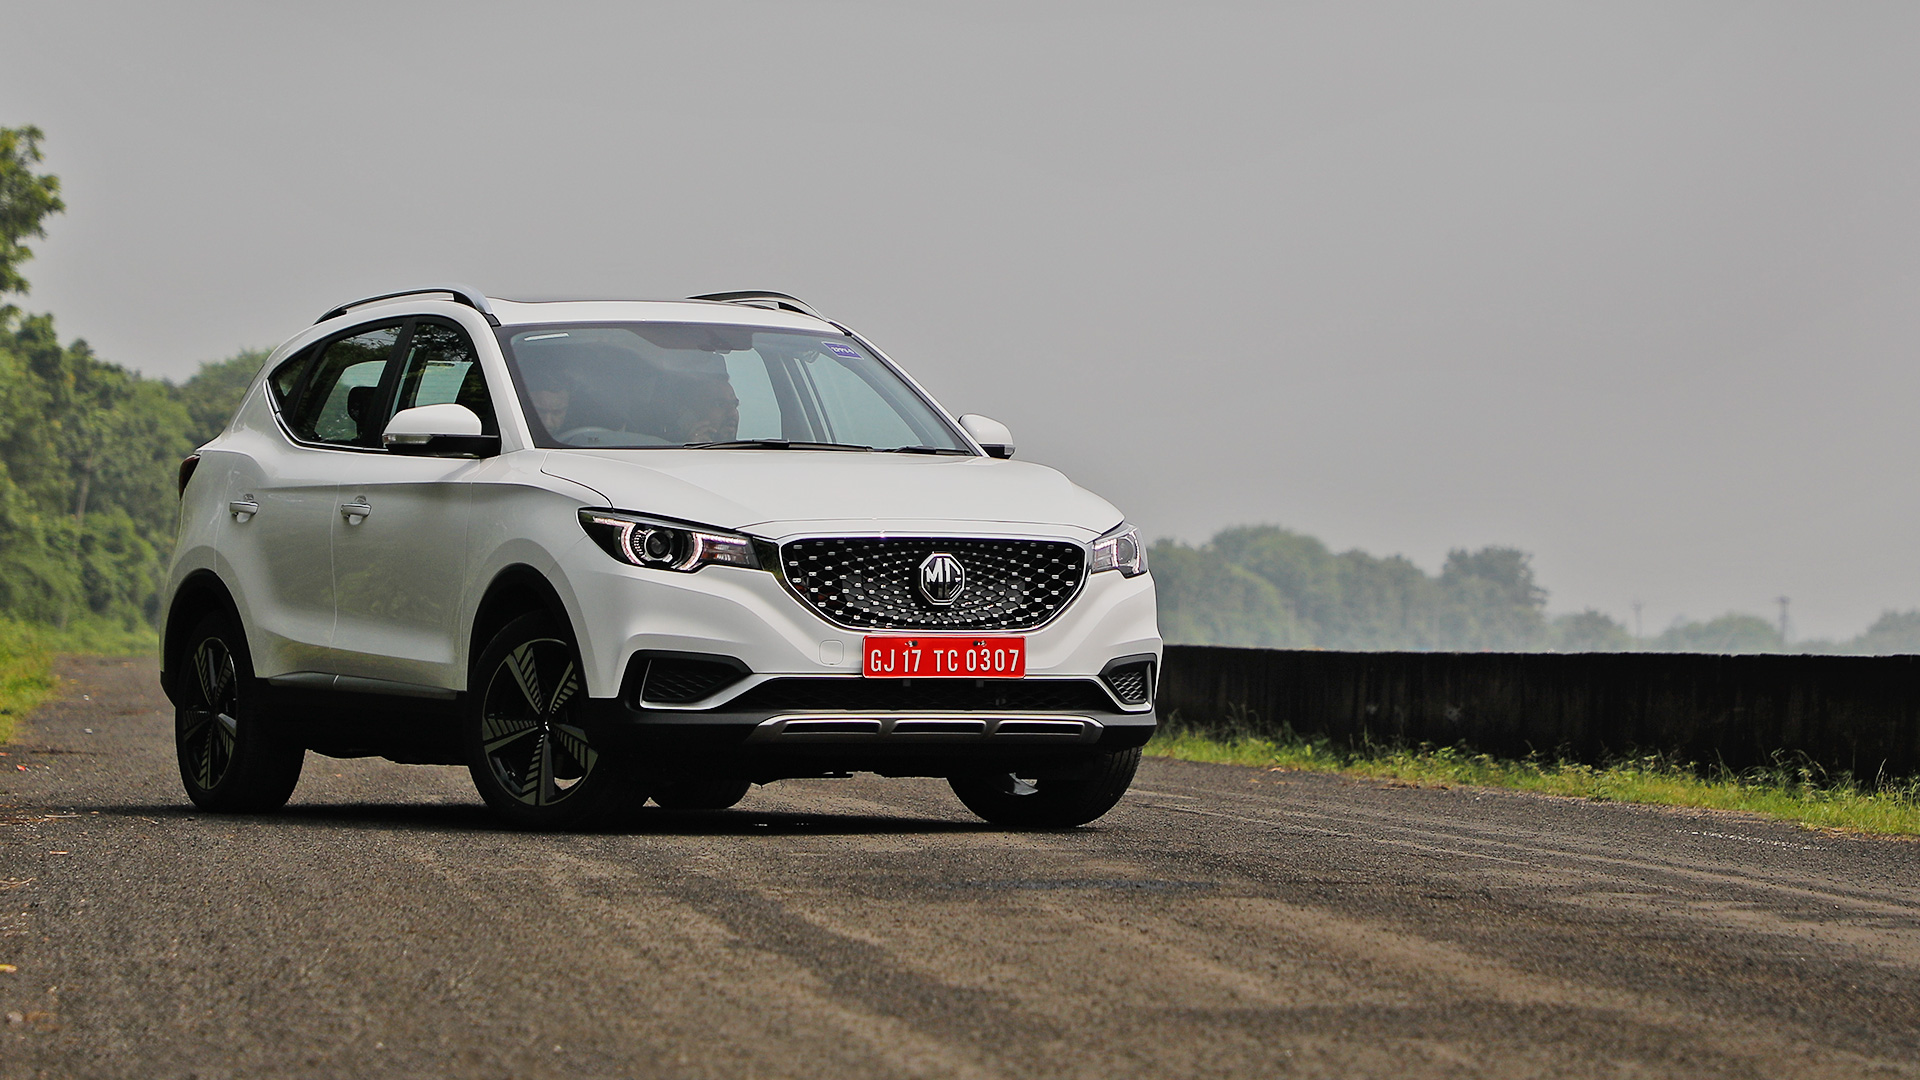 Mg Zs Ev 2021 Price Mileage Reviews Specification Gallery Overdrive